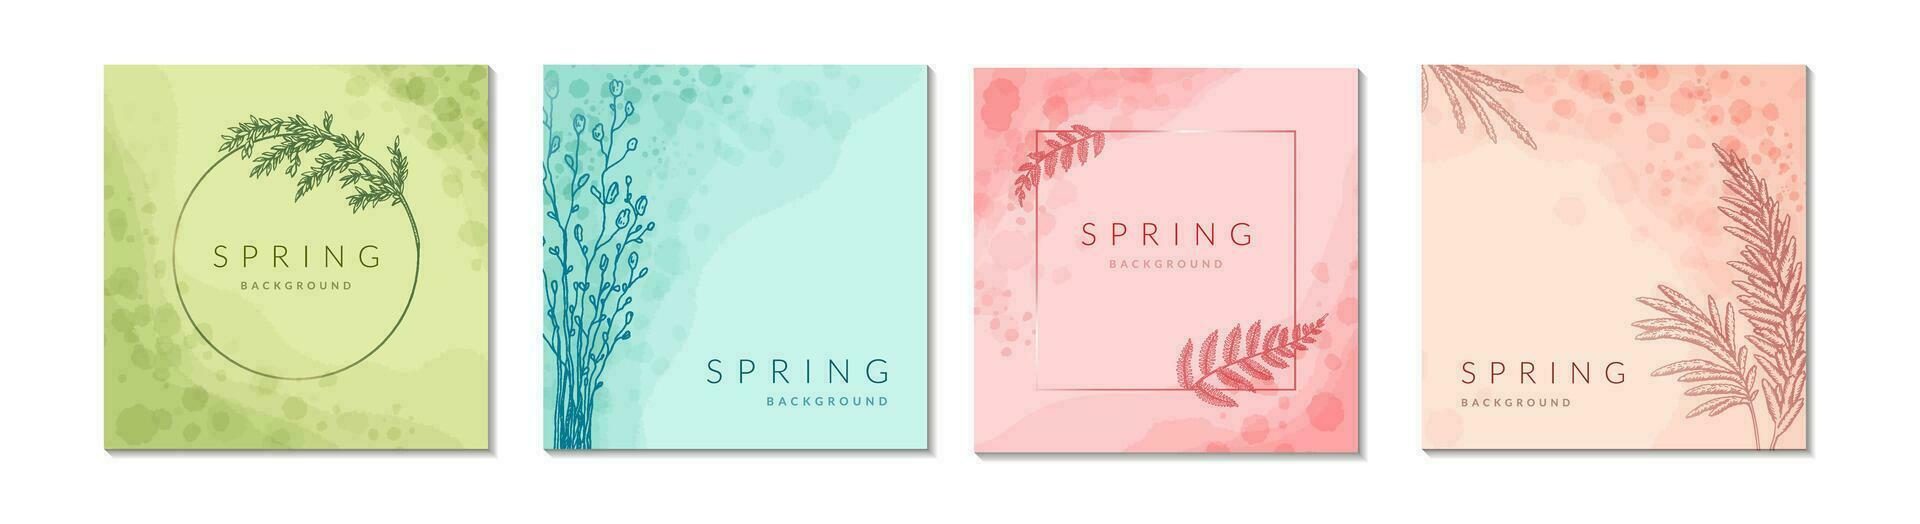 Spring elegant floral watercolor abstract background set. Square and circle flower frames. Social media post, presentation, greeting card, spa, jewellery, beauty salon, wedding invitation template. vector